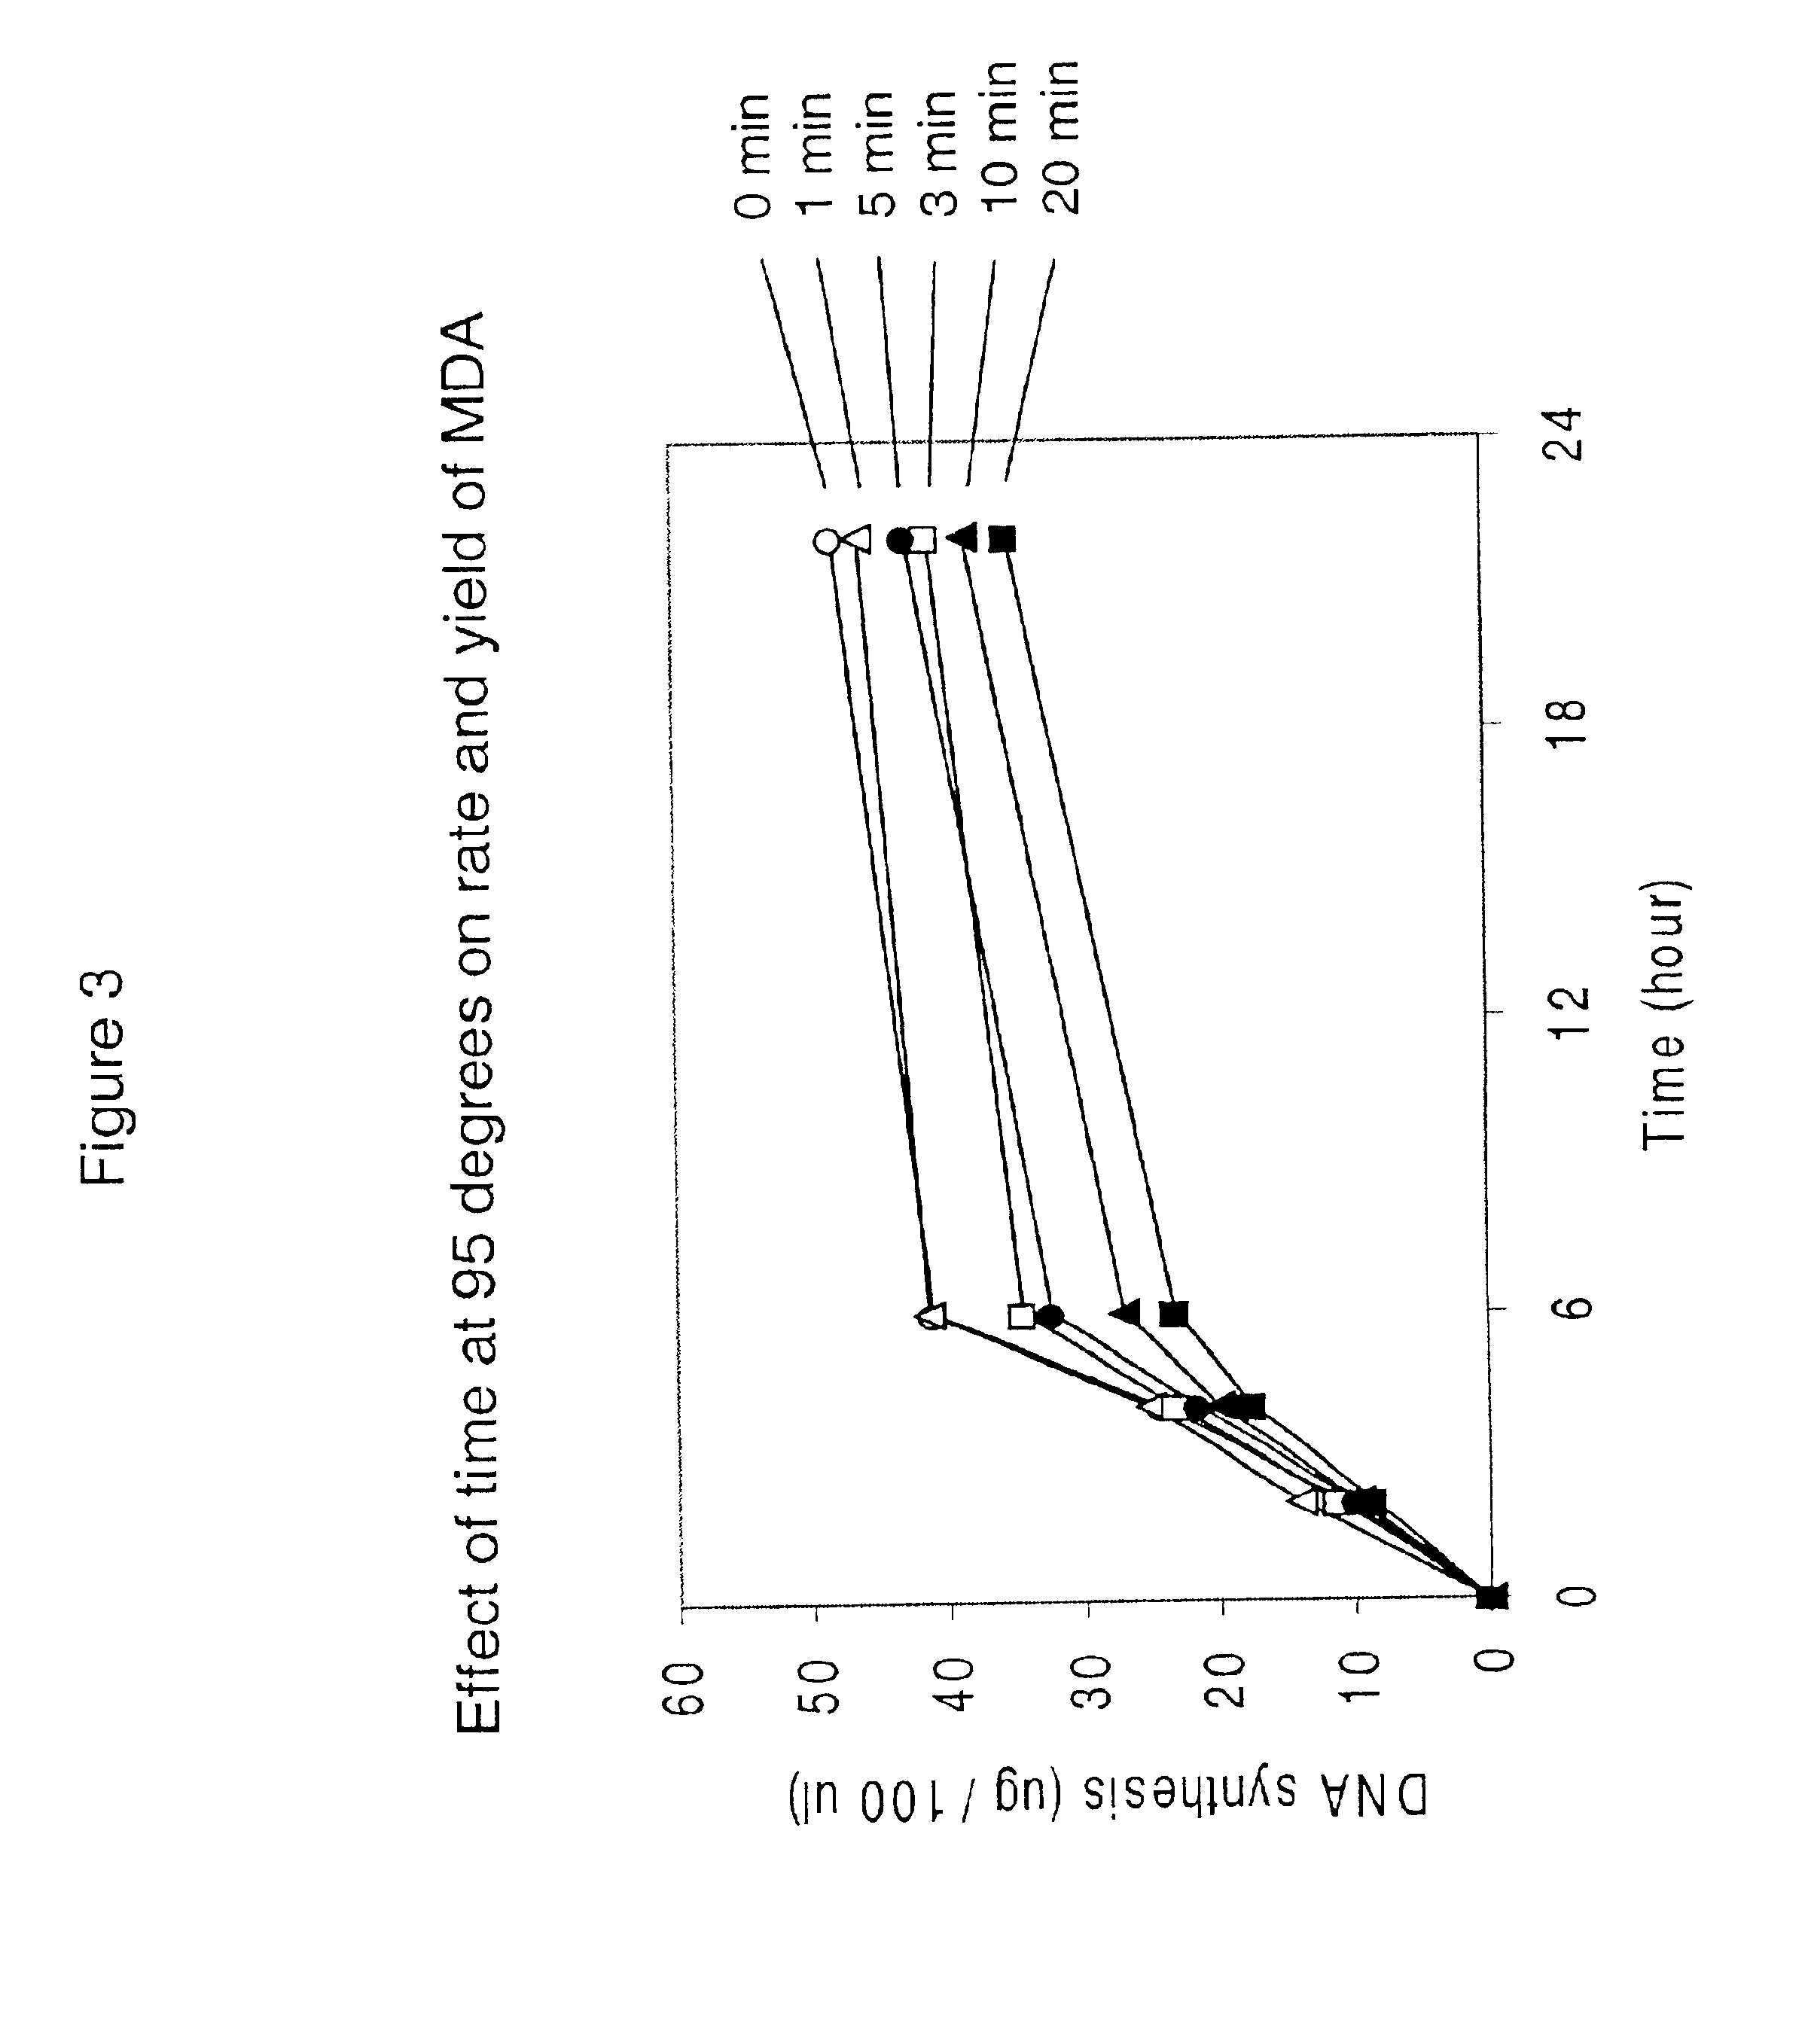 Multiple displacement amplification